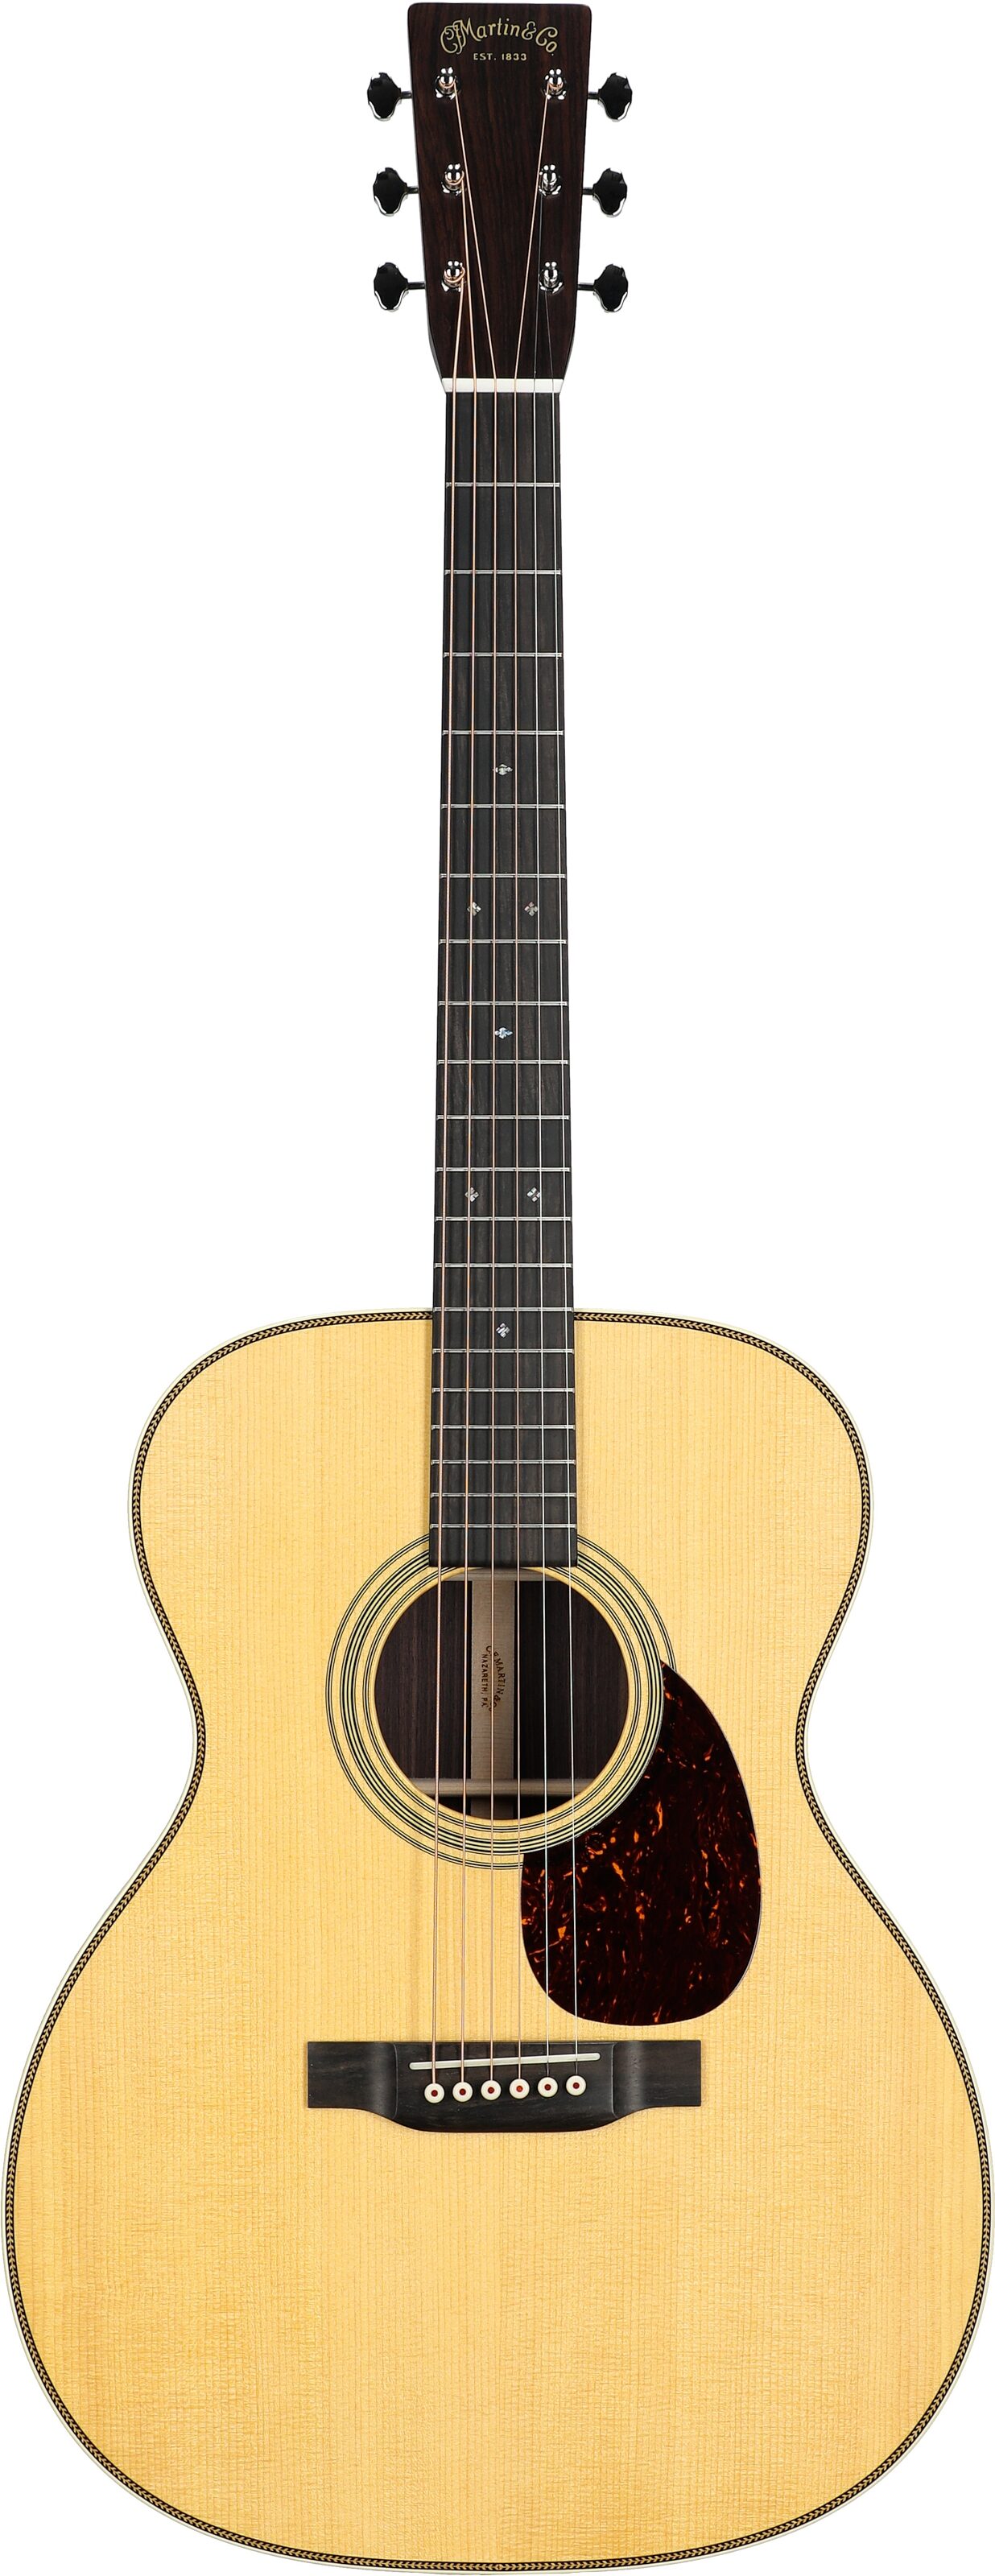 Martin OM-28 Redesign Acoustic Guitar (with Case)